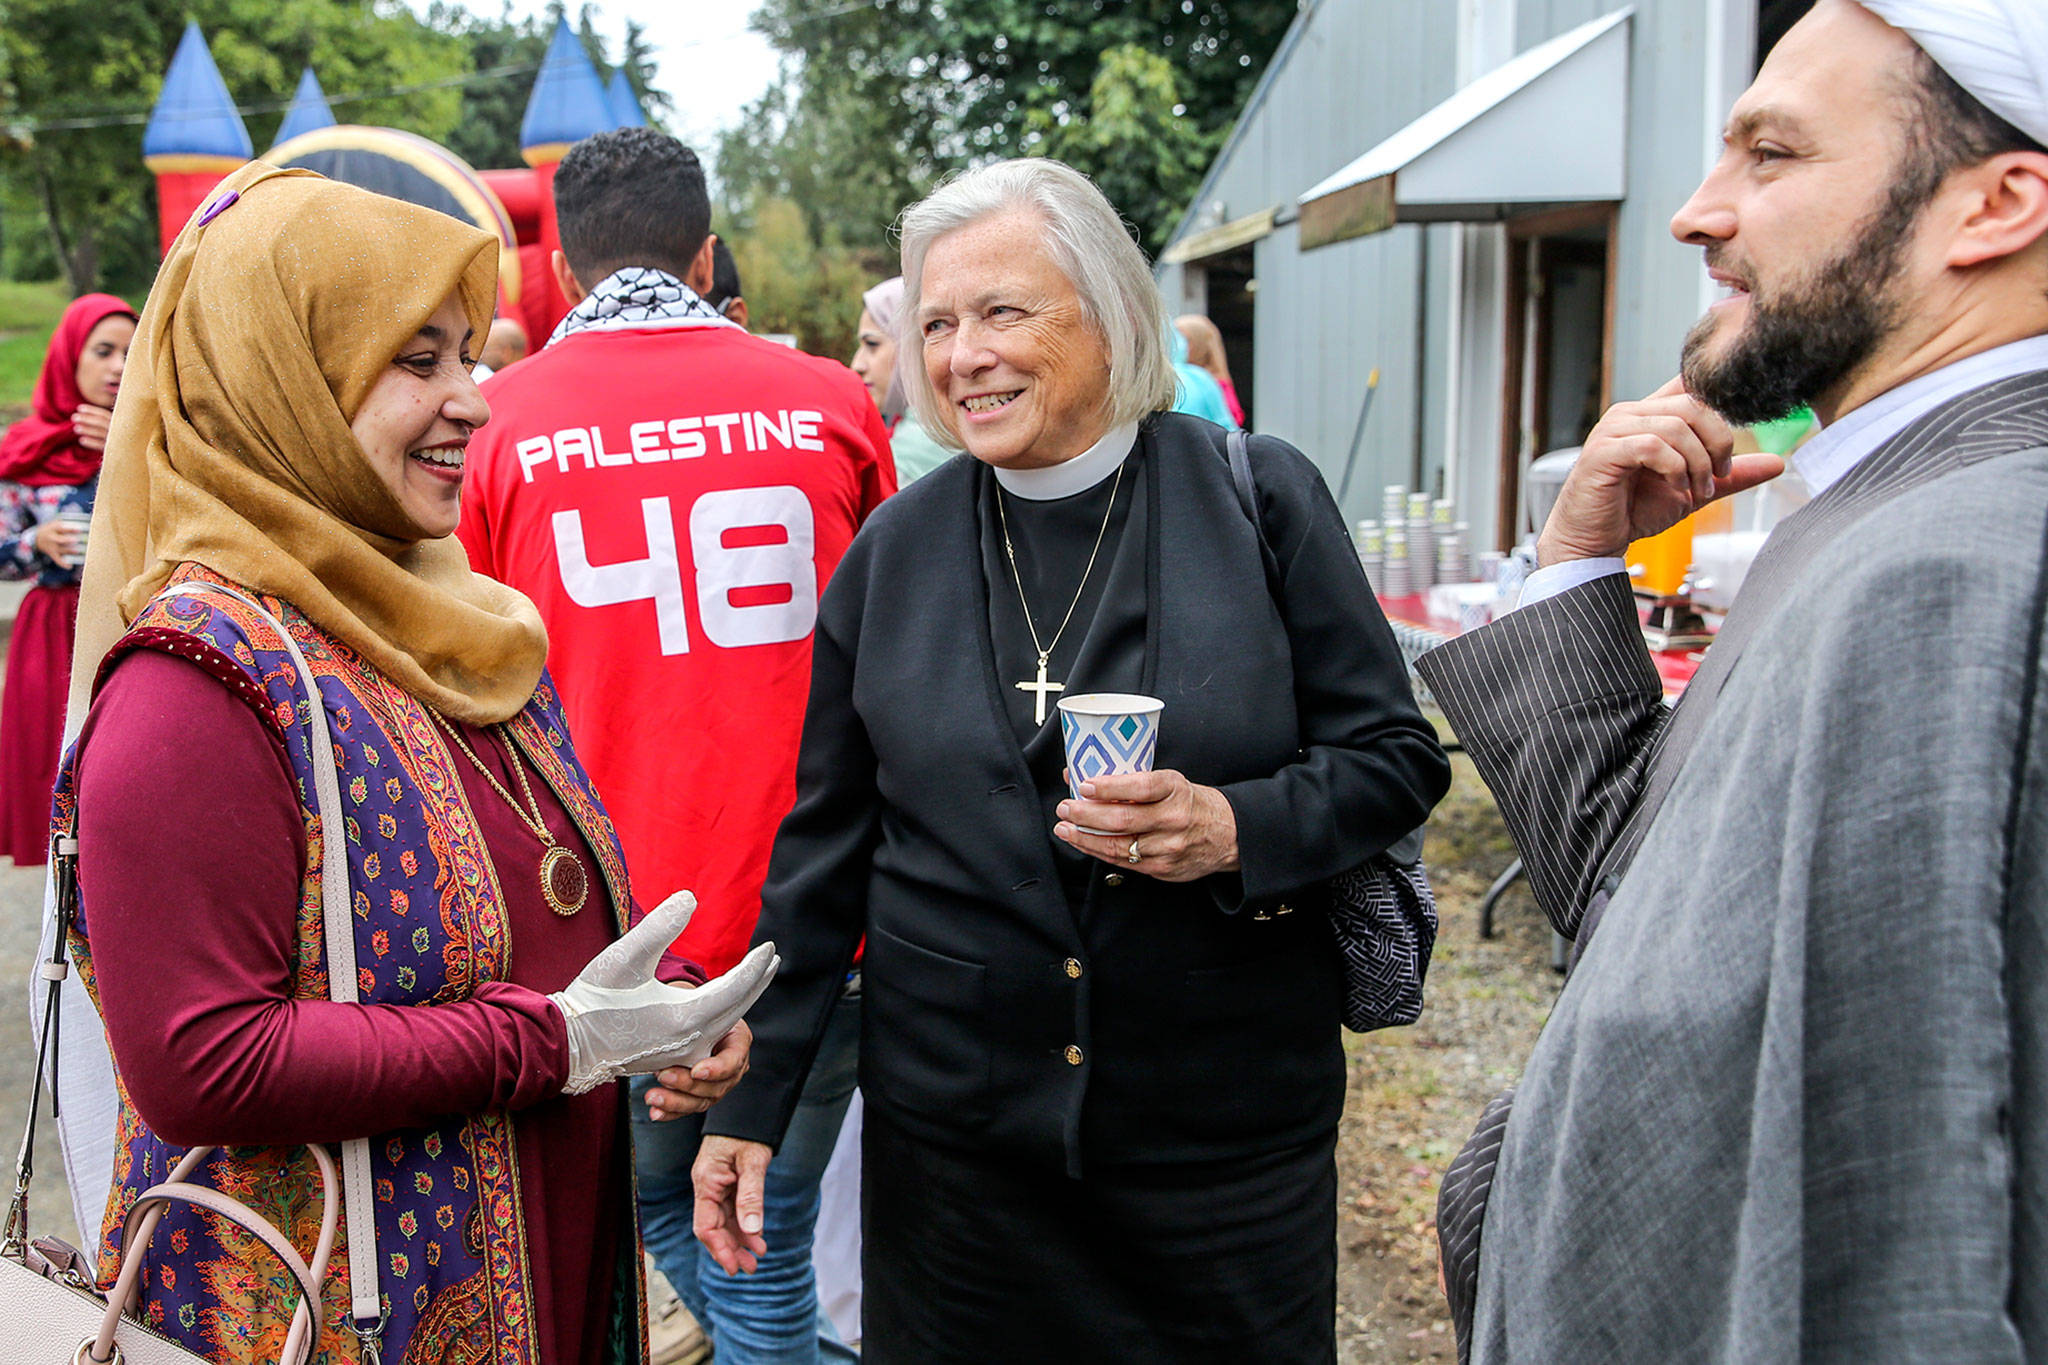 Zahra Abidi (left), of the Husayniah Islamic Society of Seattle, retired pastor Janice Nesse and guest Imam Rasoul Naghavi visit Sunday morning at a block party and potluck in Snohomish that was hosted by the organization. (Kevin Clark / The Herald)